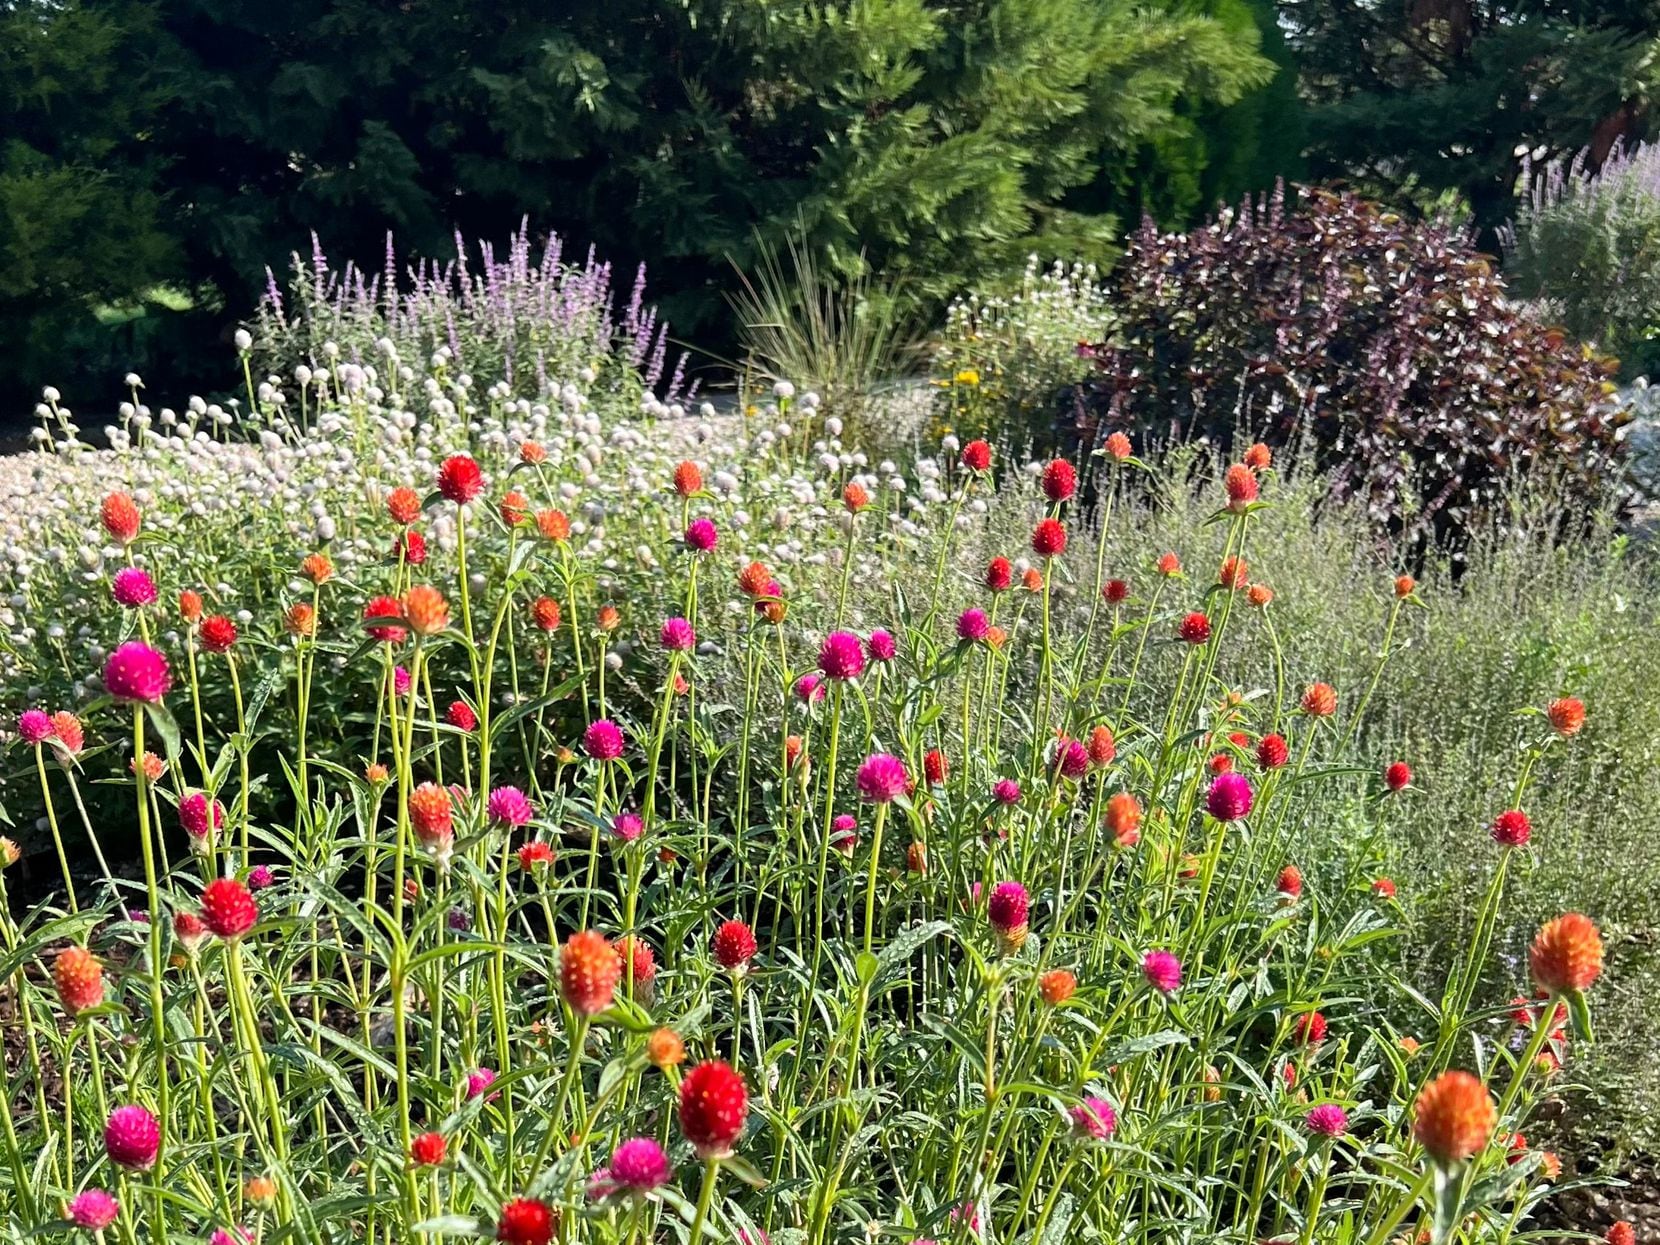 A field of gomphrena blooms in red and purple.